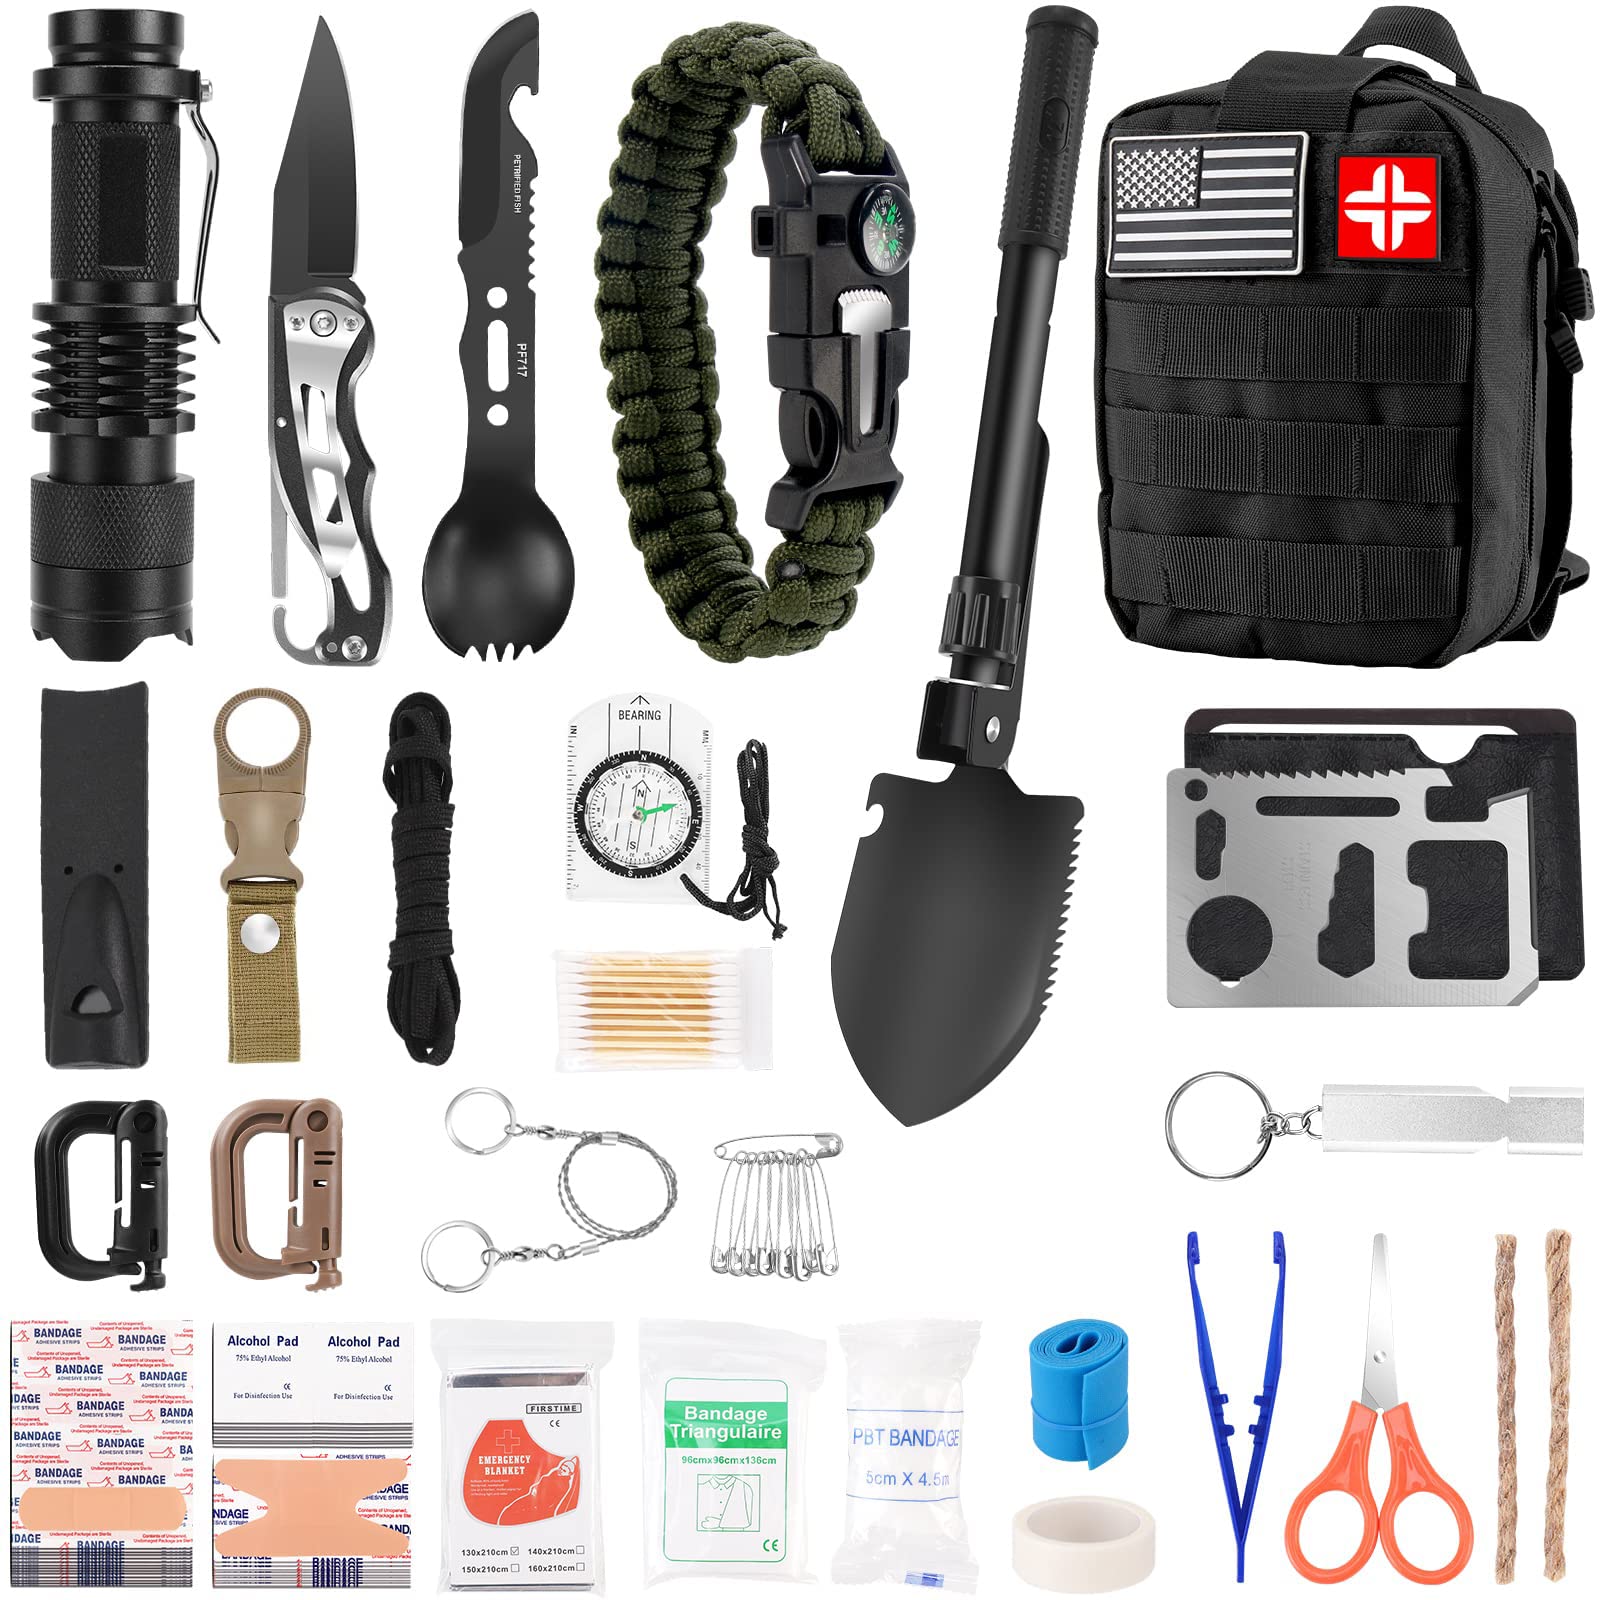  Emergency Survival & First Aid Kit & Tourniquet - 250 PCS Go Bugout  Bag Survival Gears with Compass Flashlight Shovel - Tactical Military Grade  EDC Backpack for Outdoor Camping Scout (Army